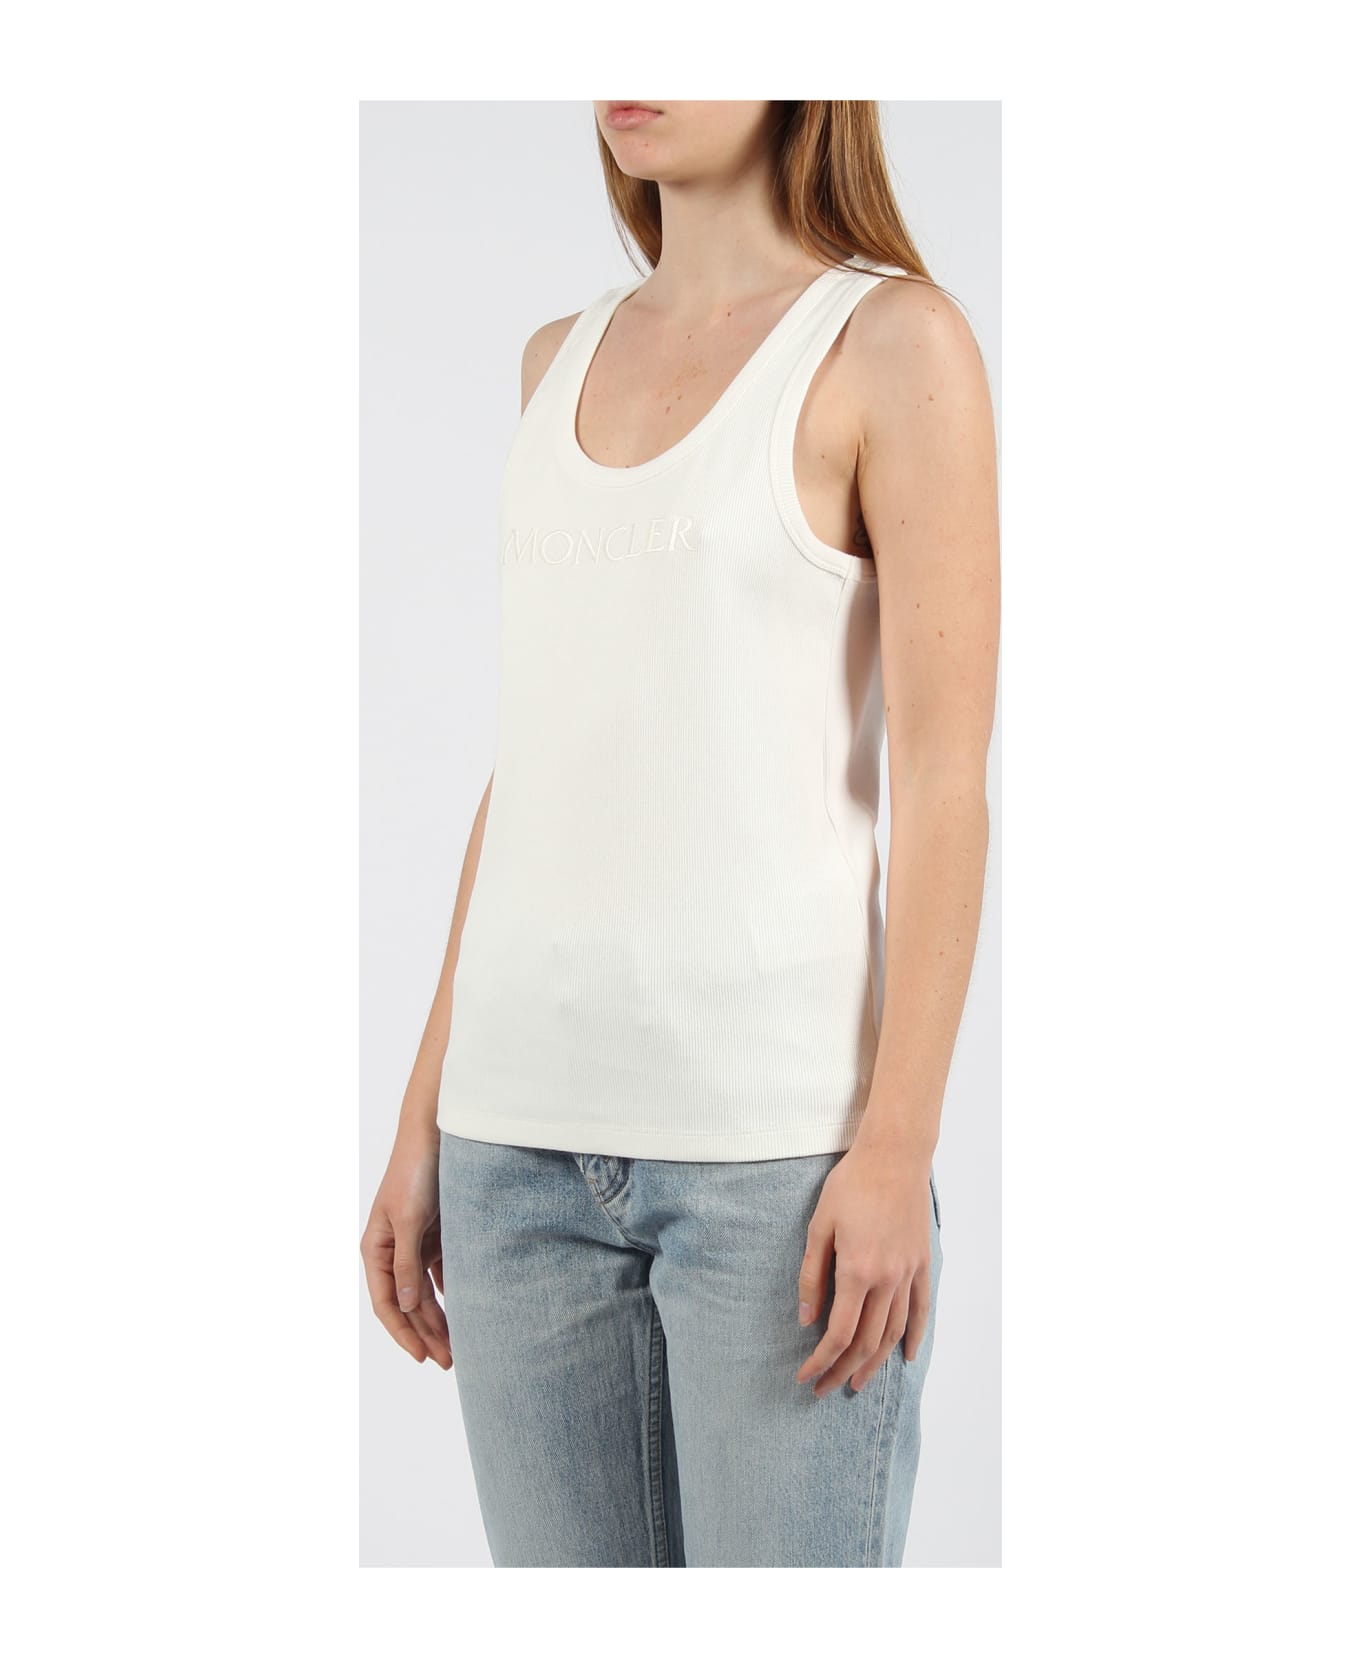 Moncler Embroidered Logo Ribbed Tank Top - White